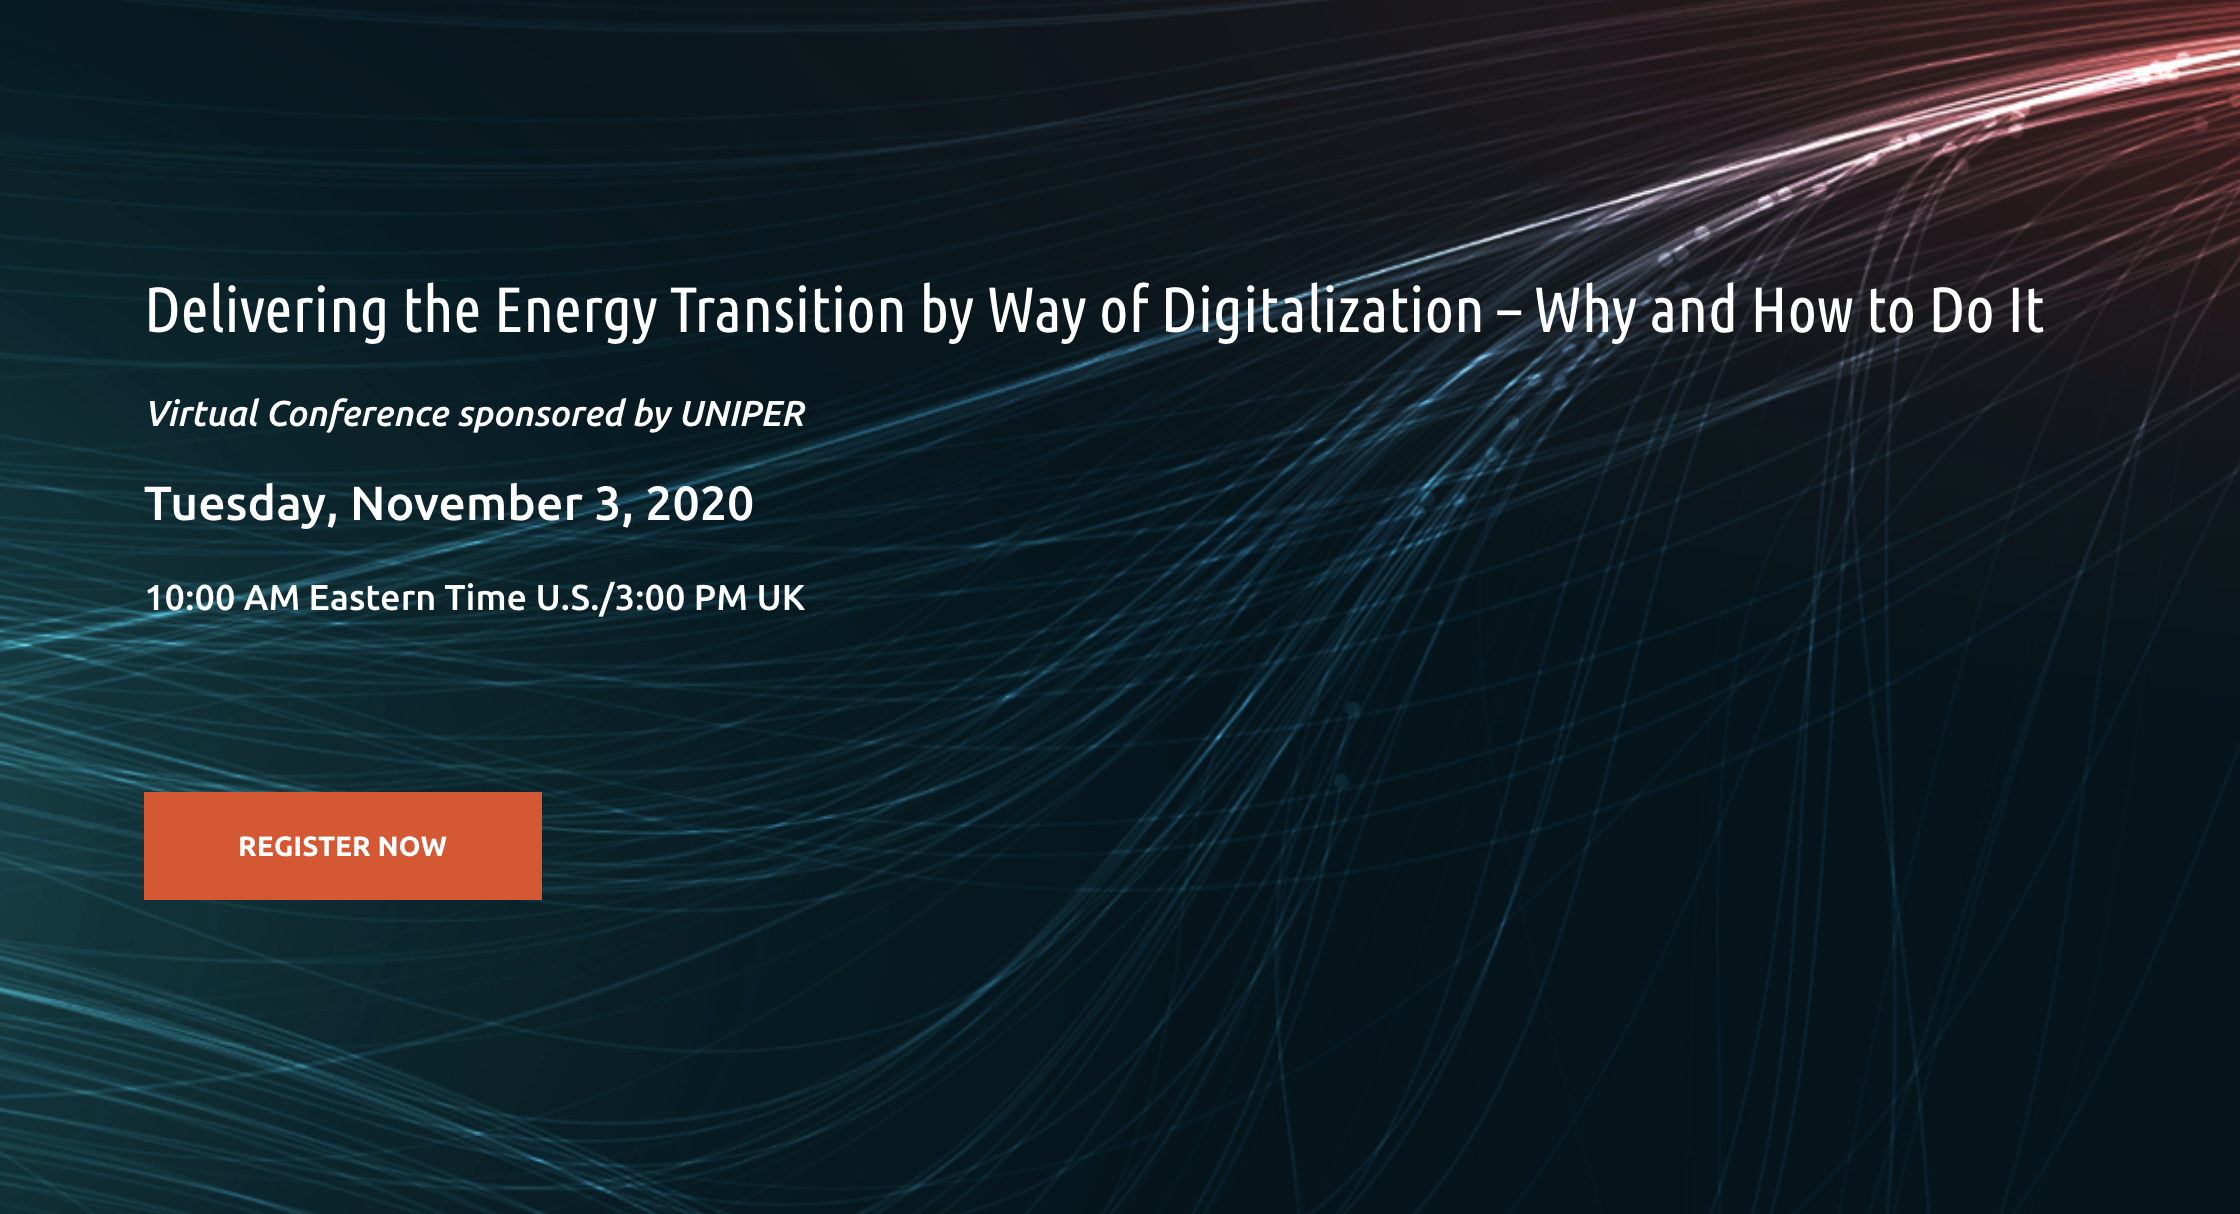 Delivering the Energy Transition by Way of Digitalization – Why and How to Do It